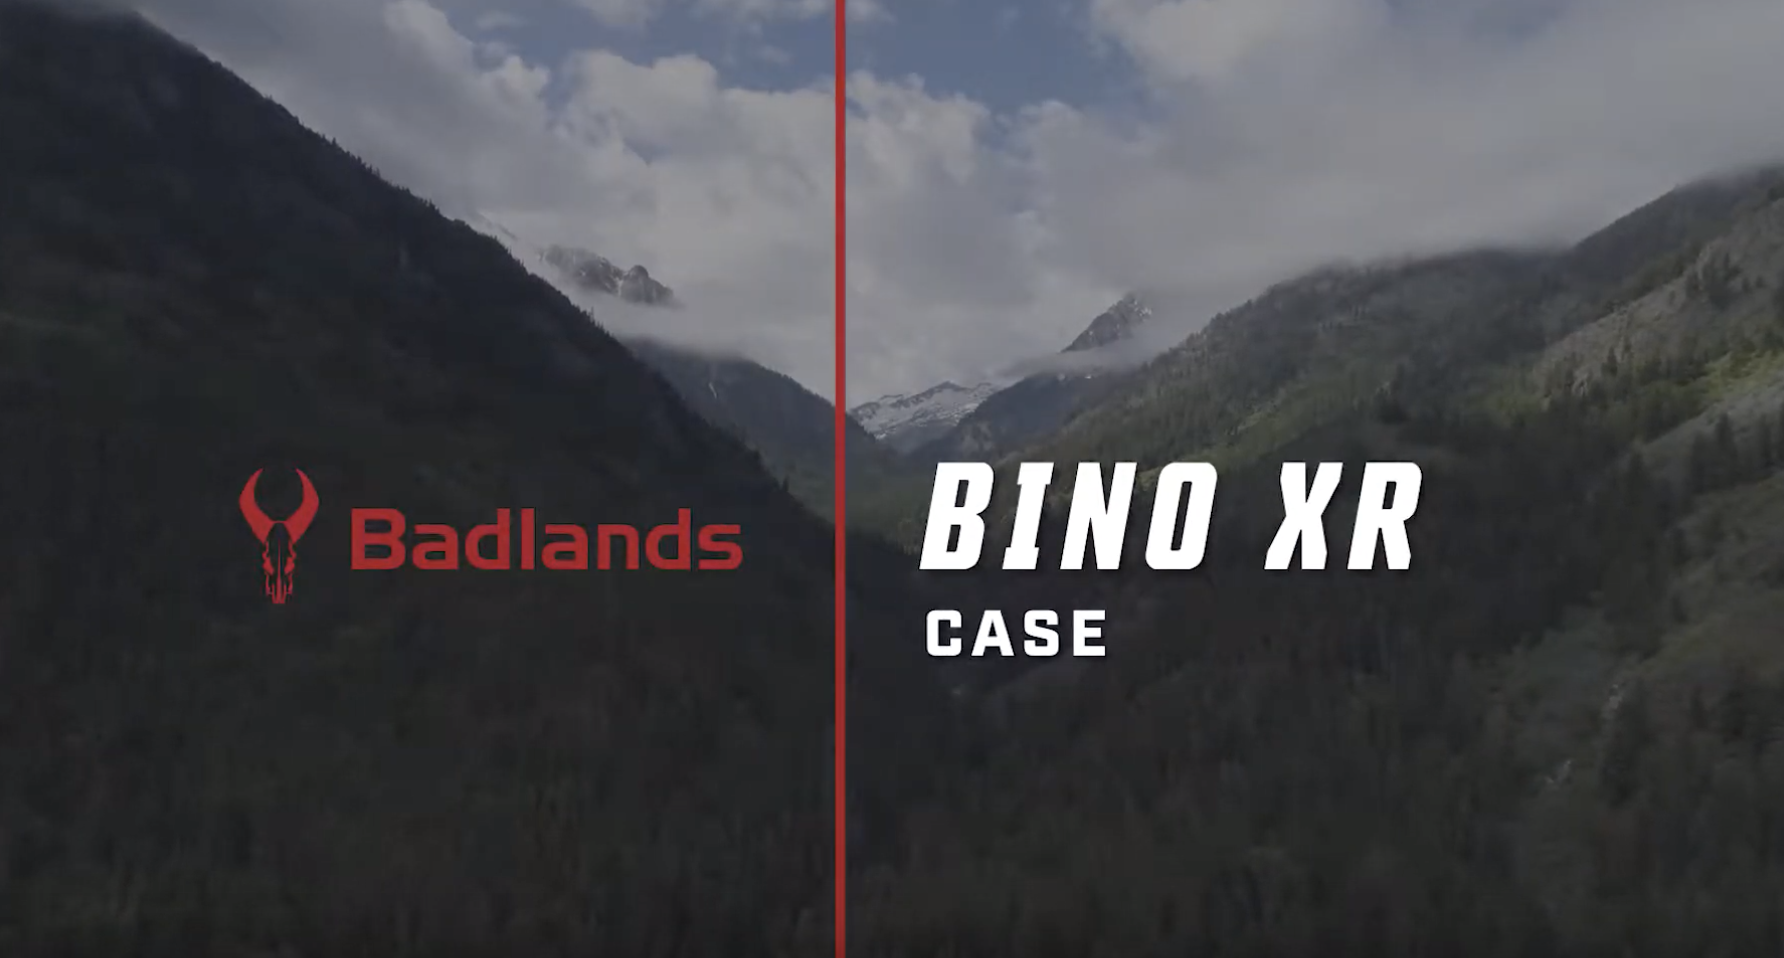 Learn More about the Bino XR Case